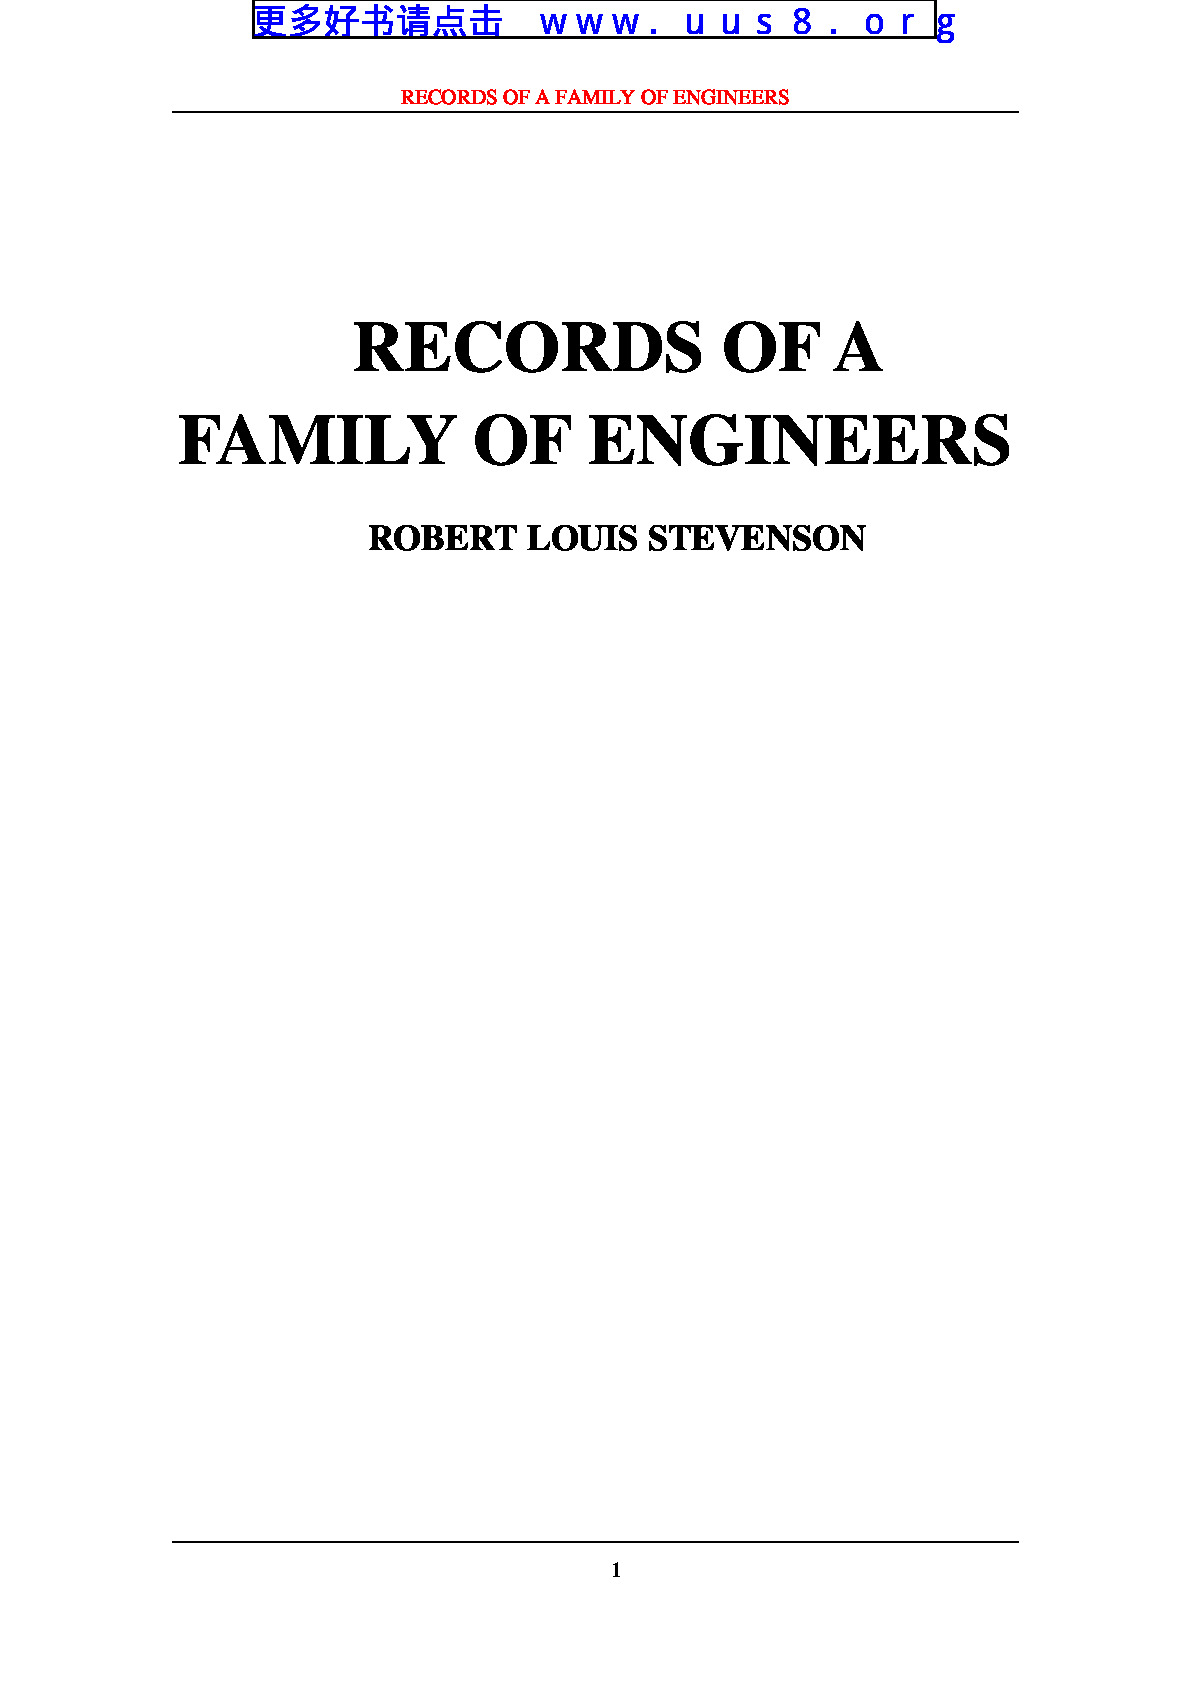 RECORDS_OF_A_FAMILY_OF_ENGINEERS(一个工程师的家庭)